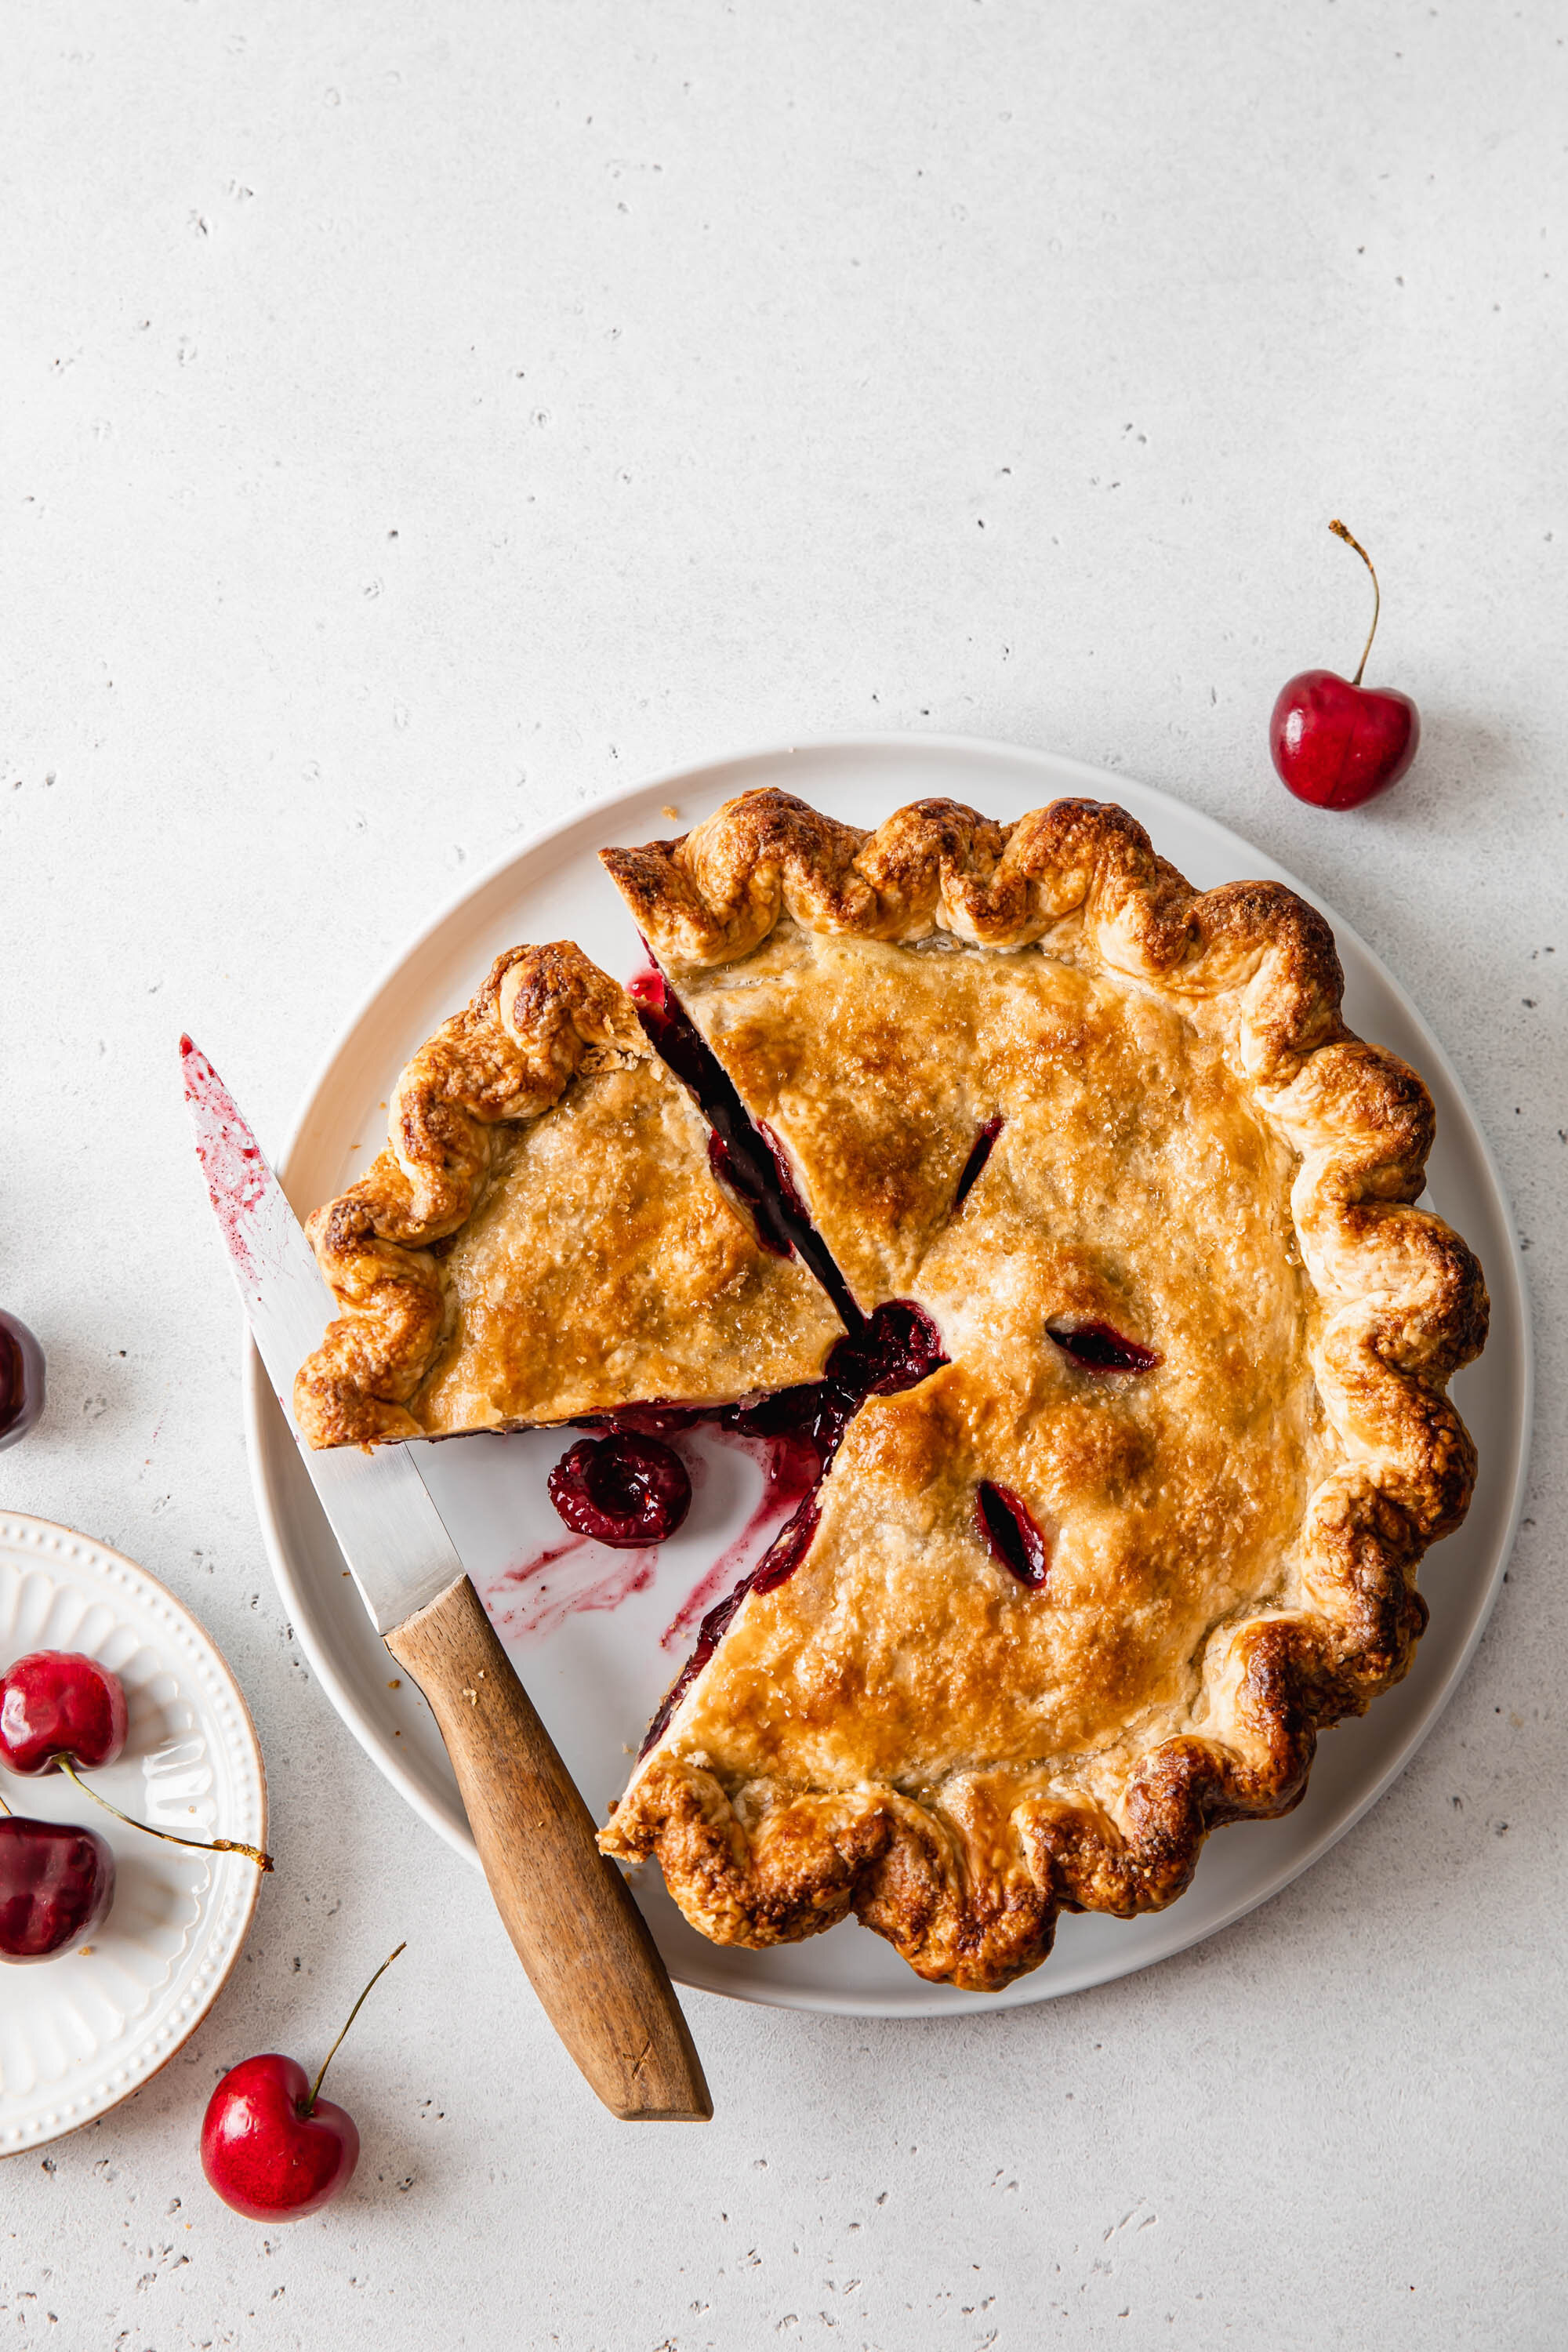 A sliced sweet cherry pie with a golden, flaky pie crust.